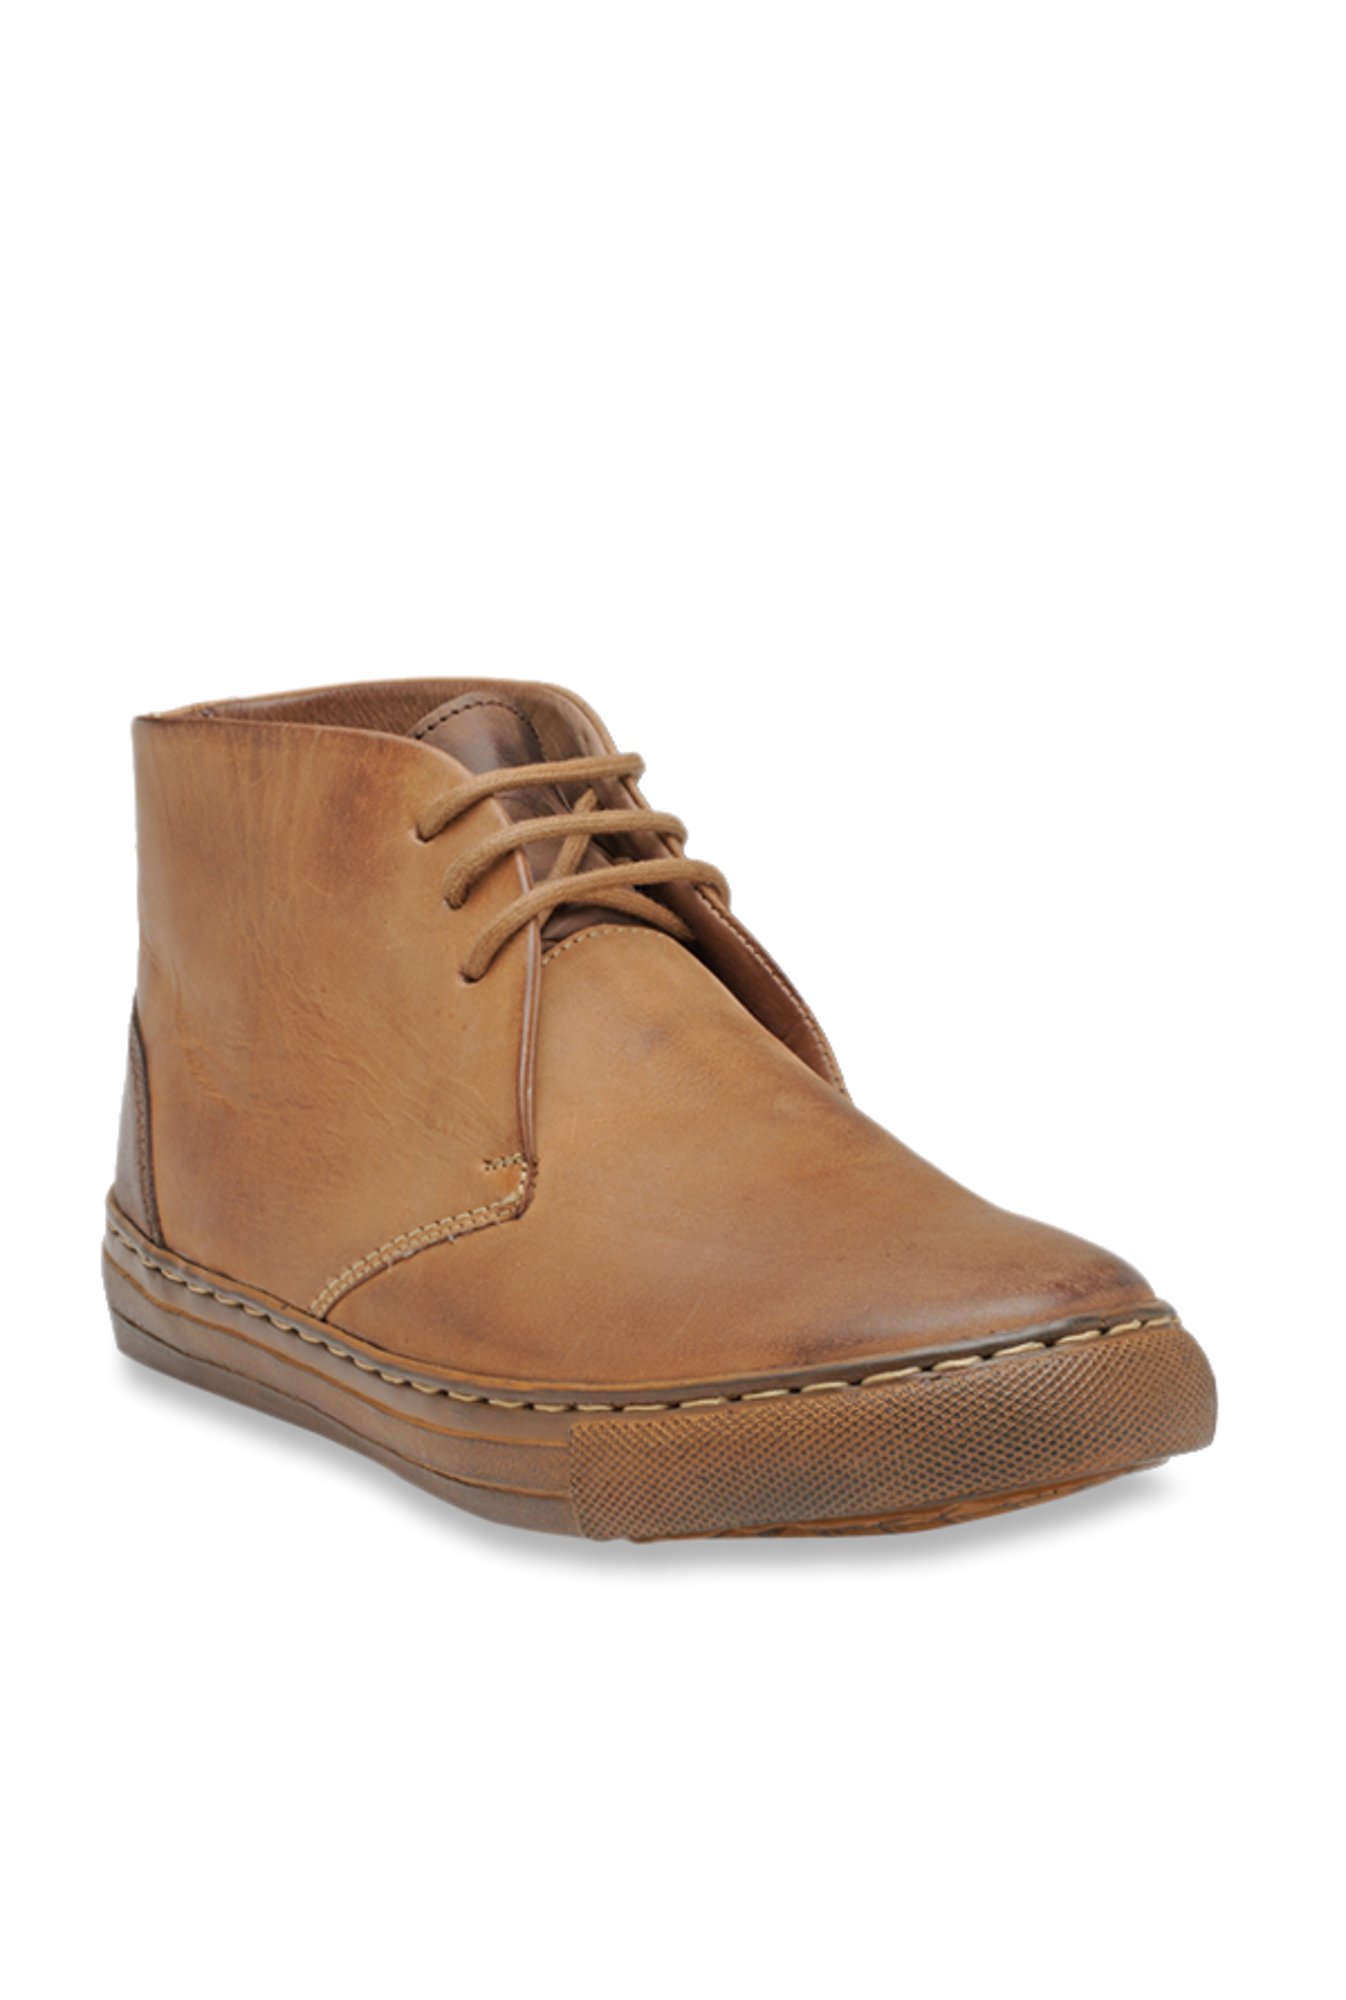 franco leone boots online india